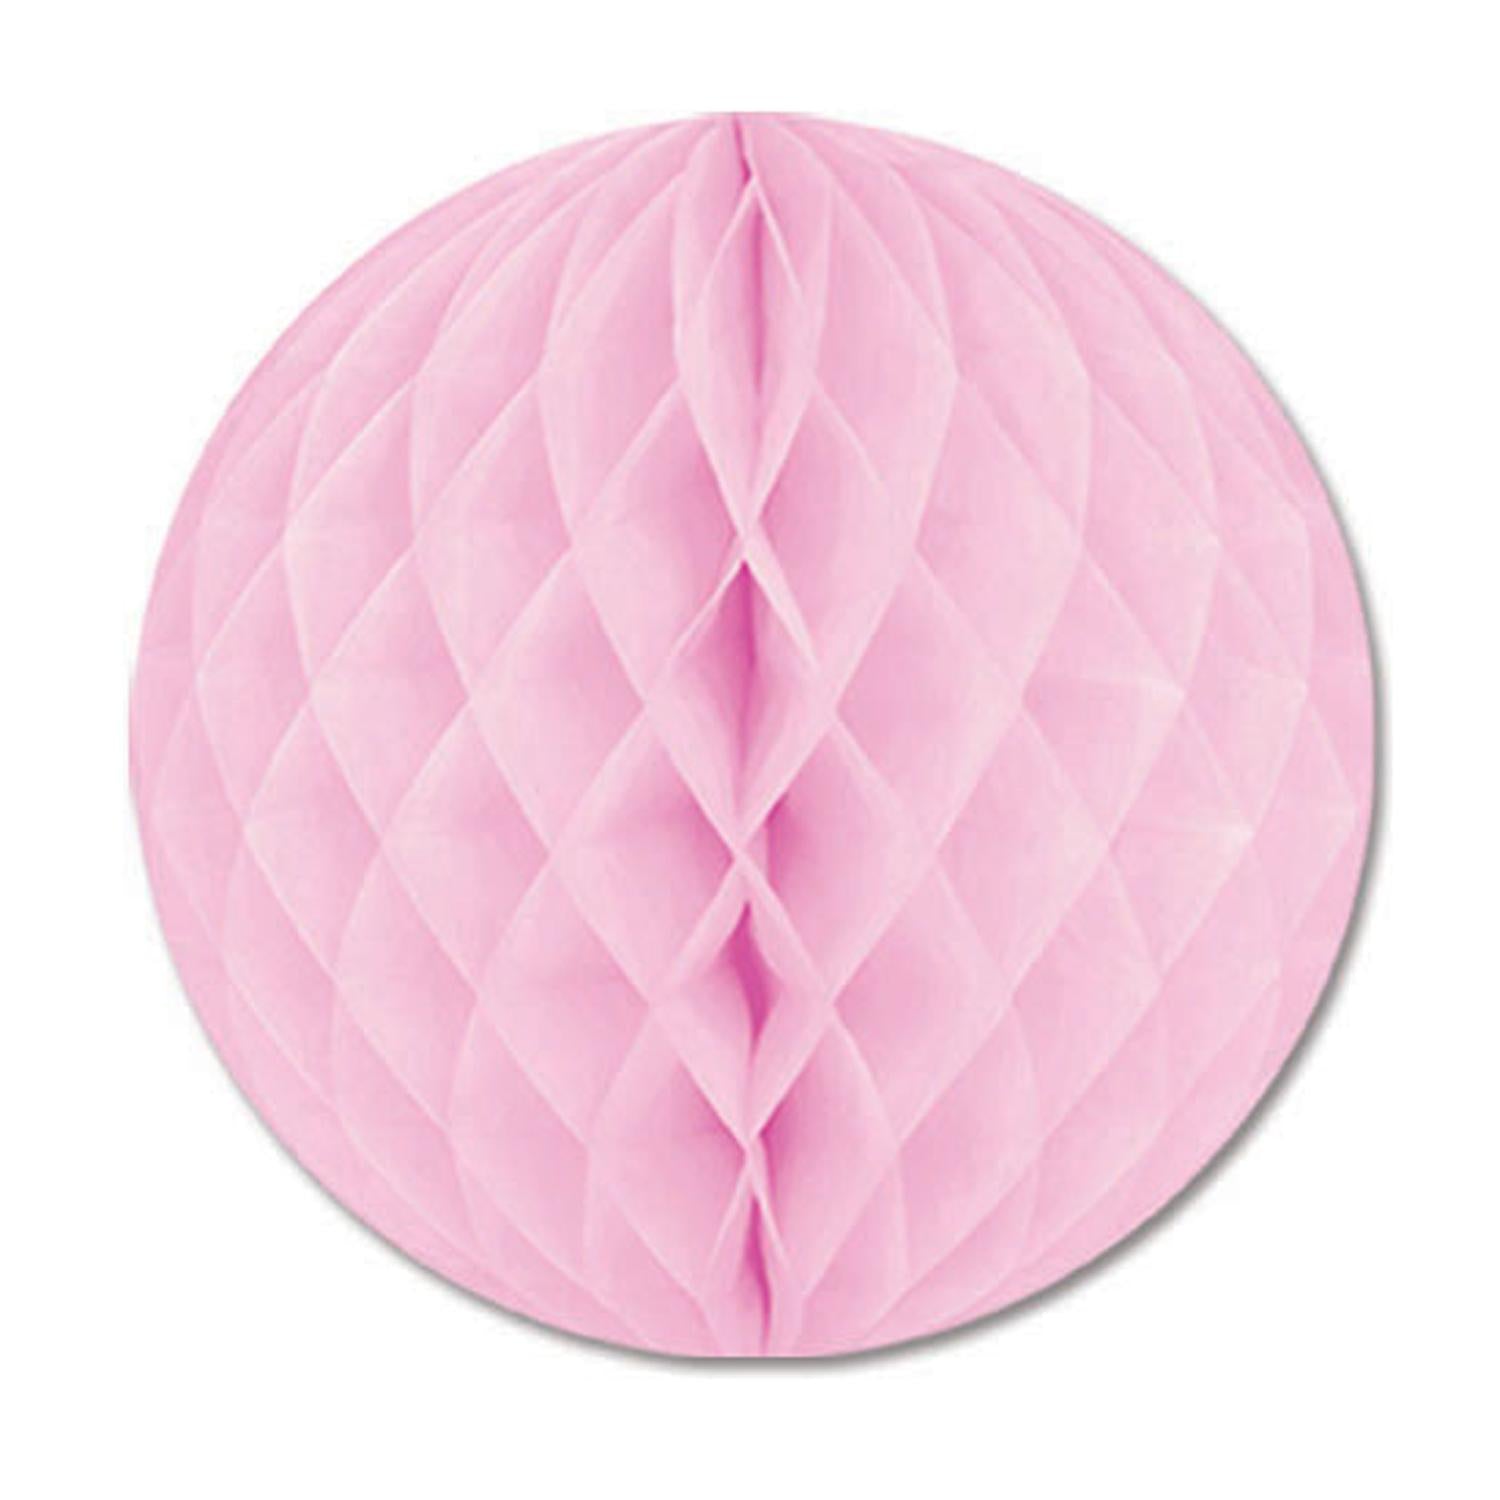 Beistle Party Tissue Ball - pink